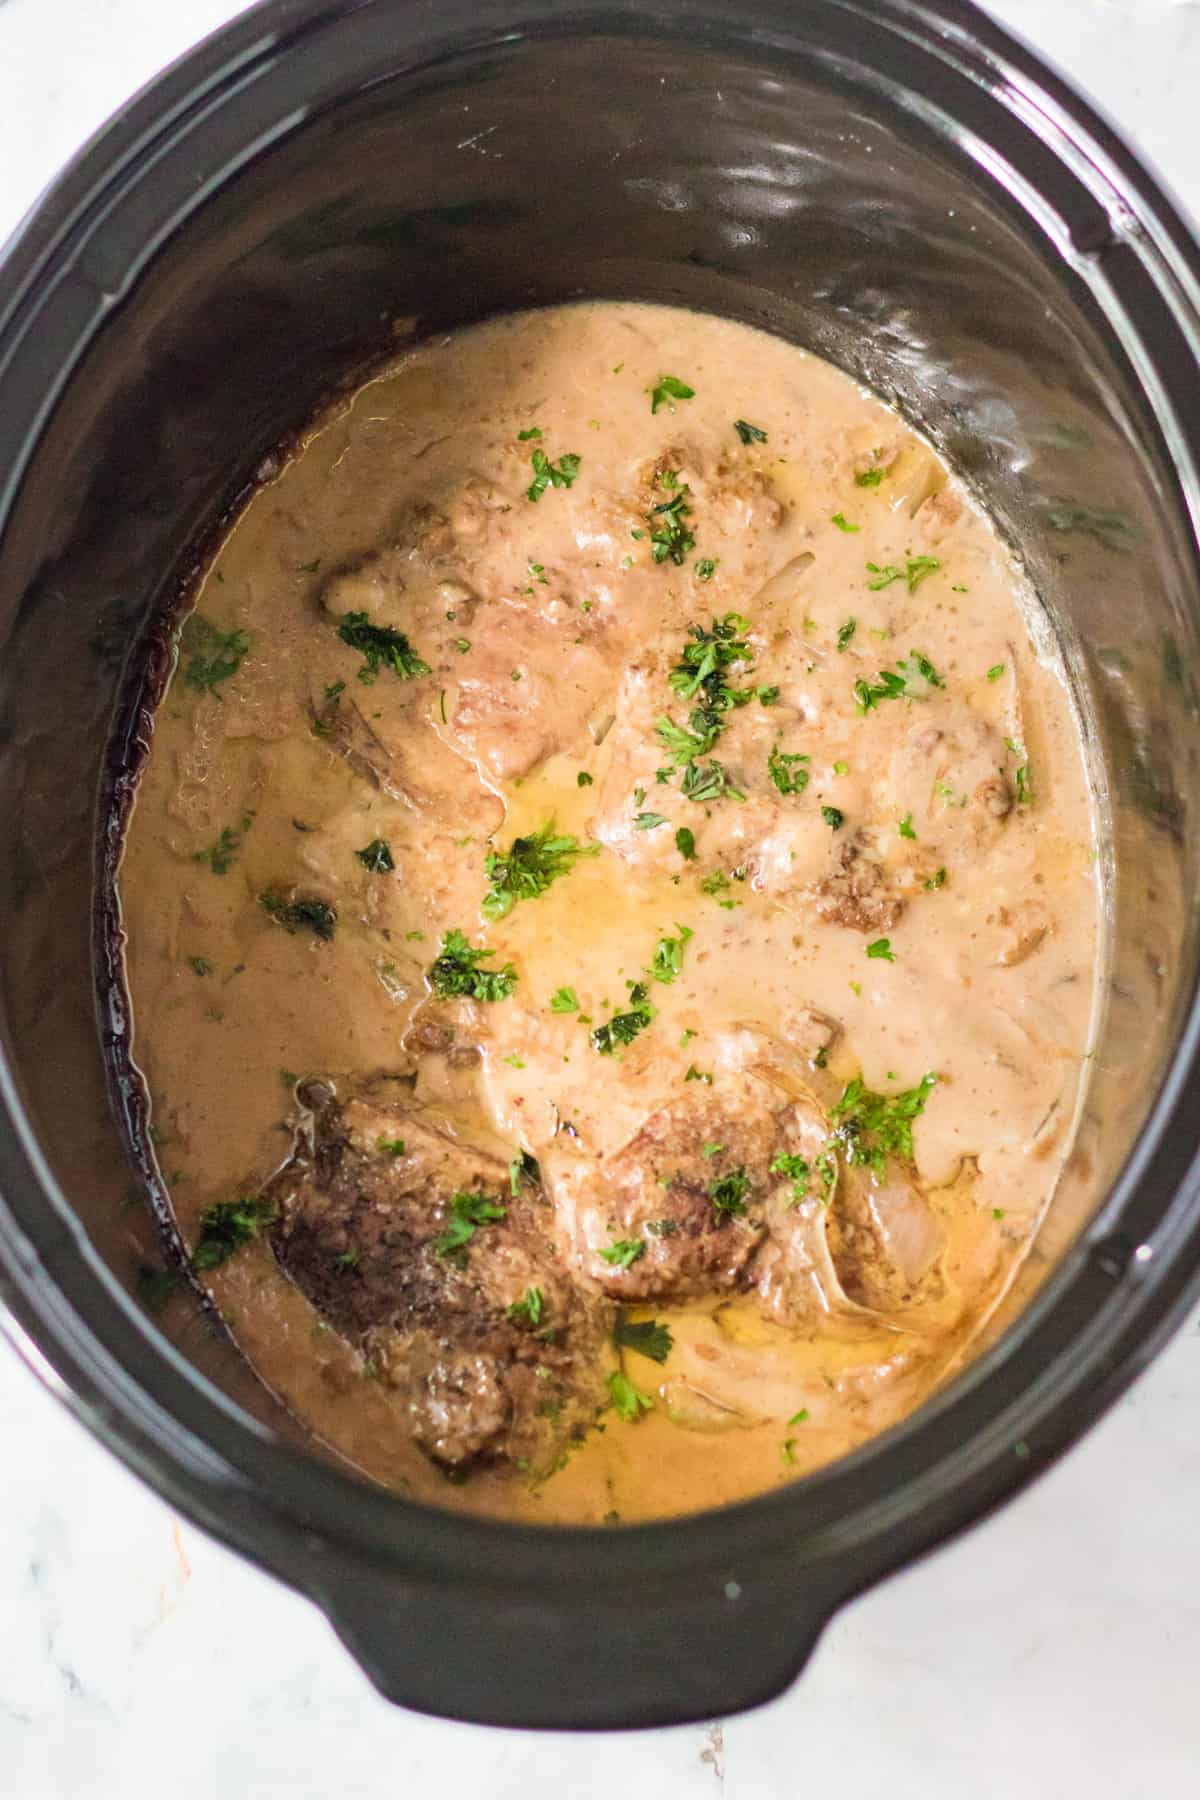 Slow cooker with cube steak and gravy